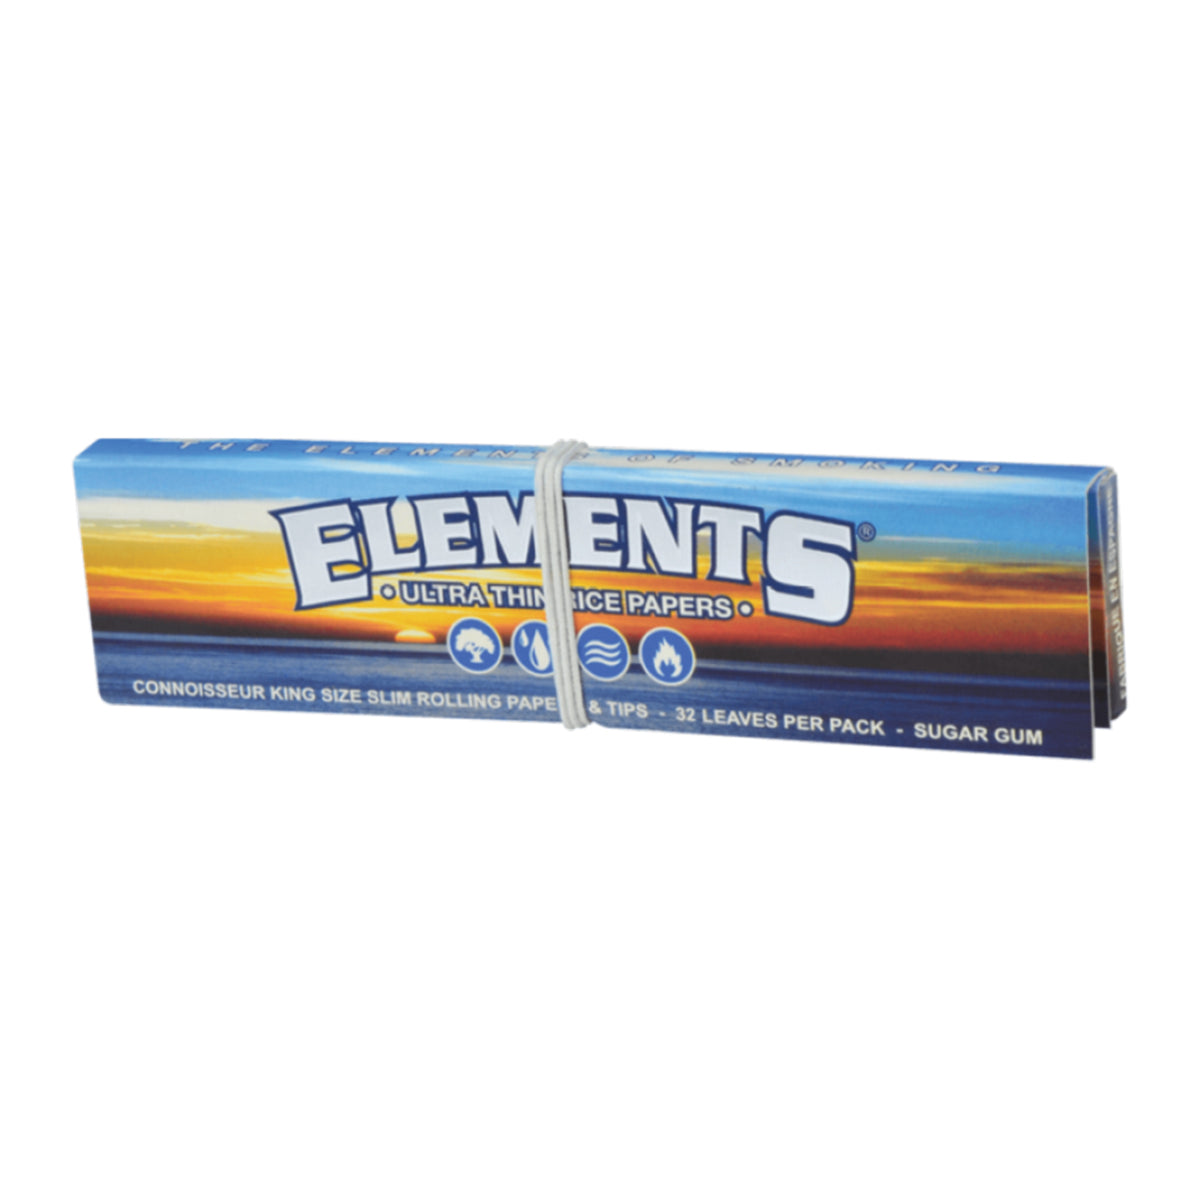 Elements Connoisseur Rolling Papers + Tips (1pack)